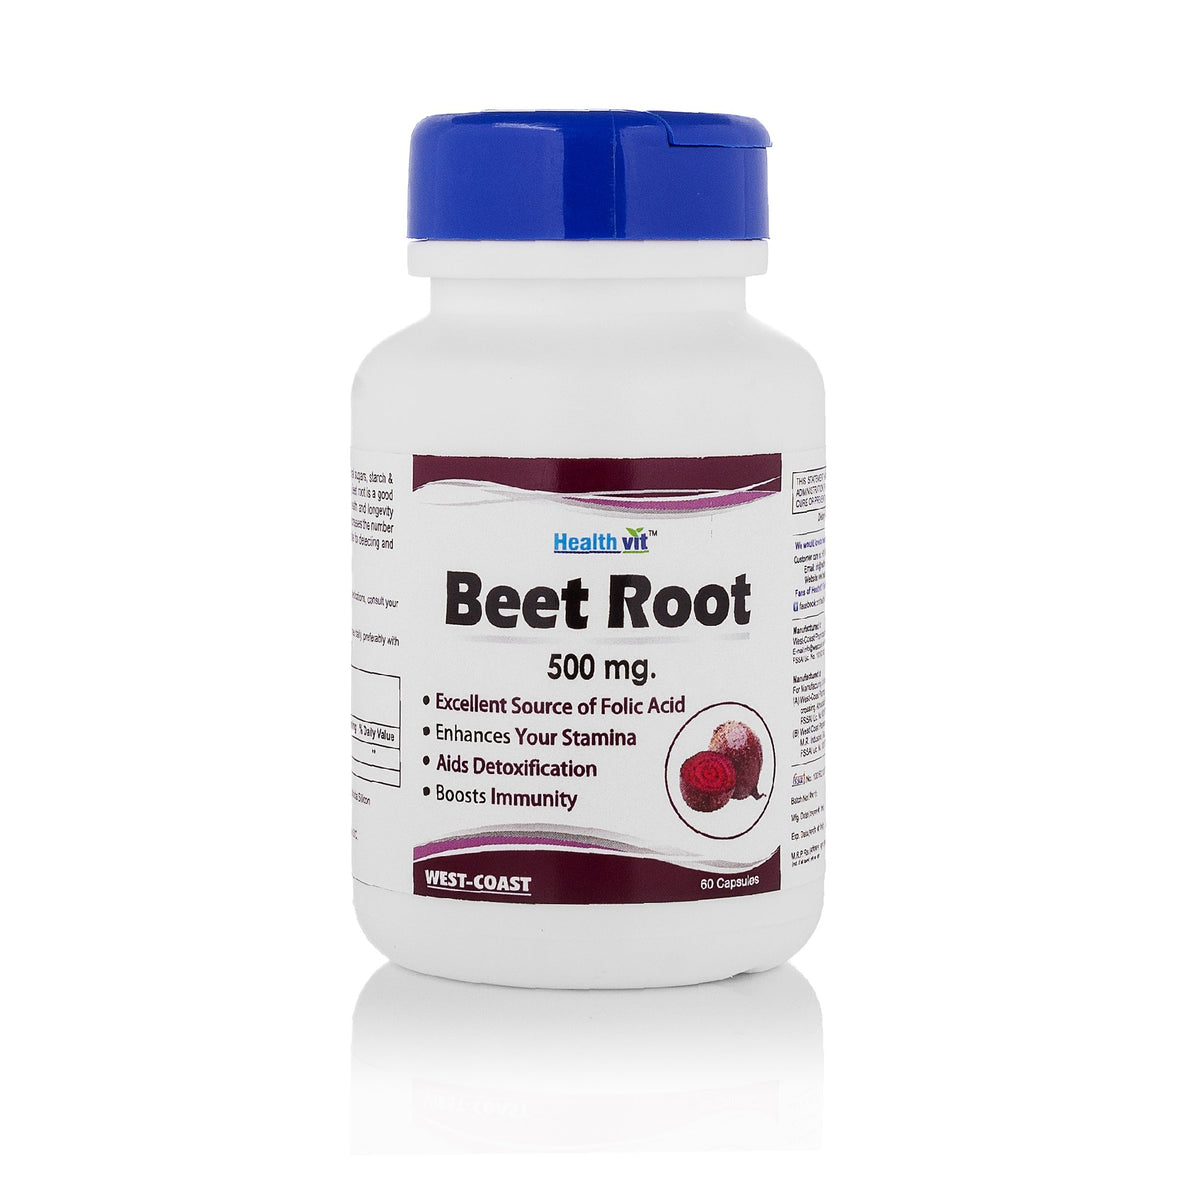 Healthvit Beet Root 500mg - Excellent Source Of Folic Acid | Healthy Heart, Endurance, Nitric Oxide Boosting Supplement | Boosts Immunity & Your Stamin | 60 Capsules